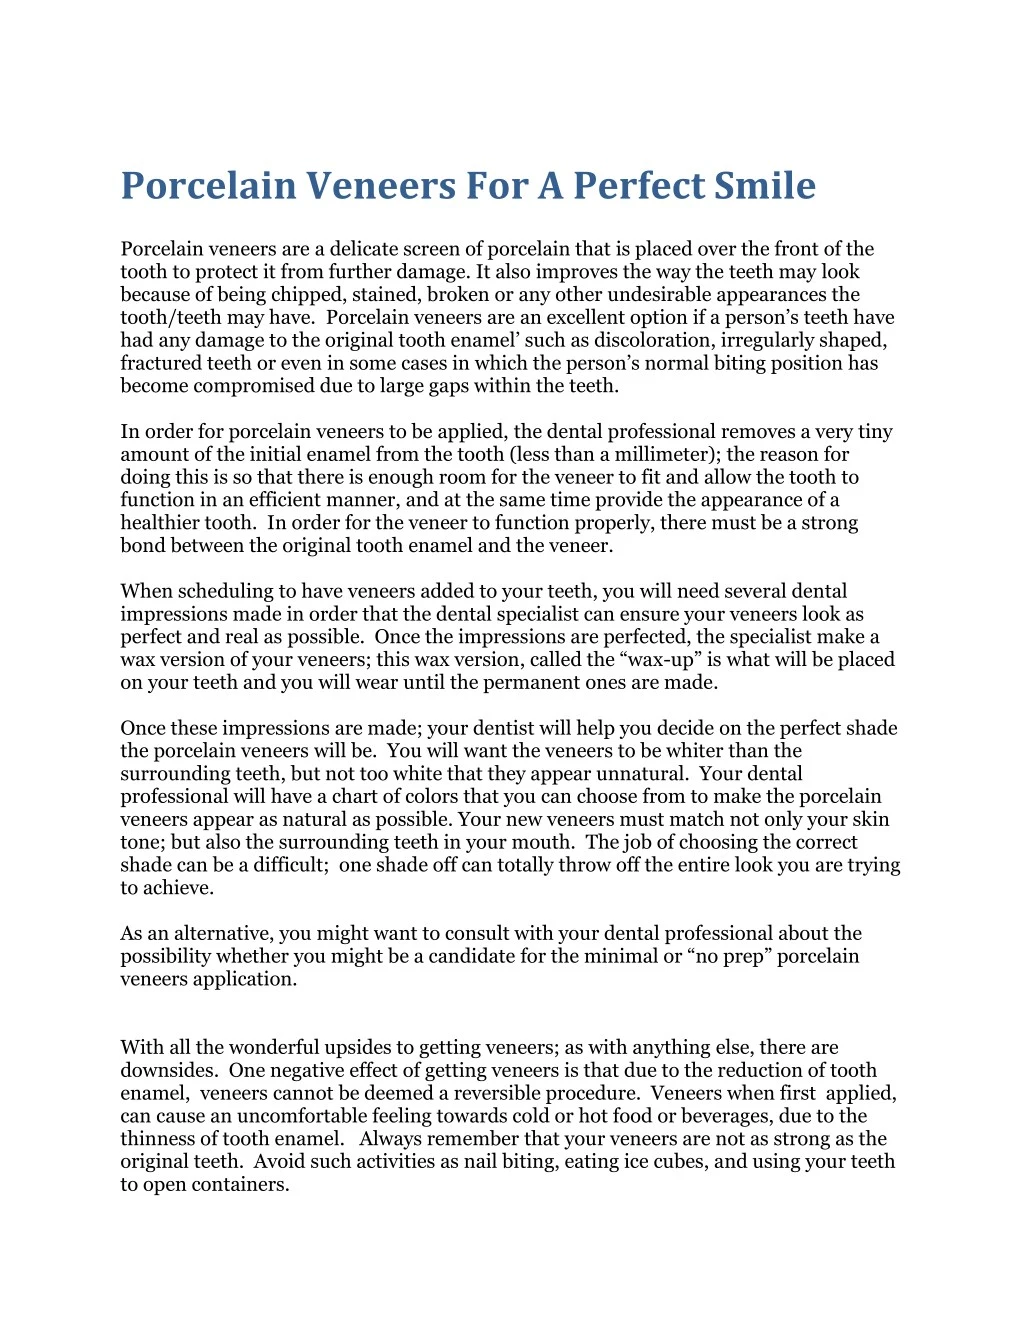 porcelain veneers for a perfect smile